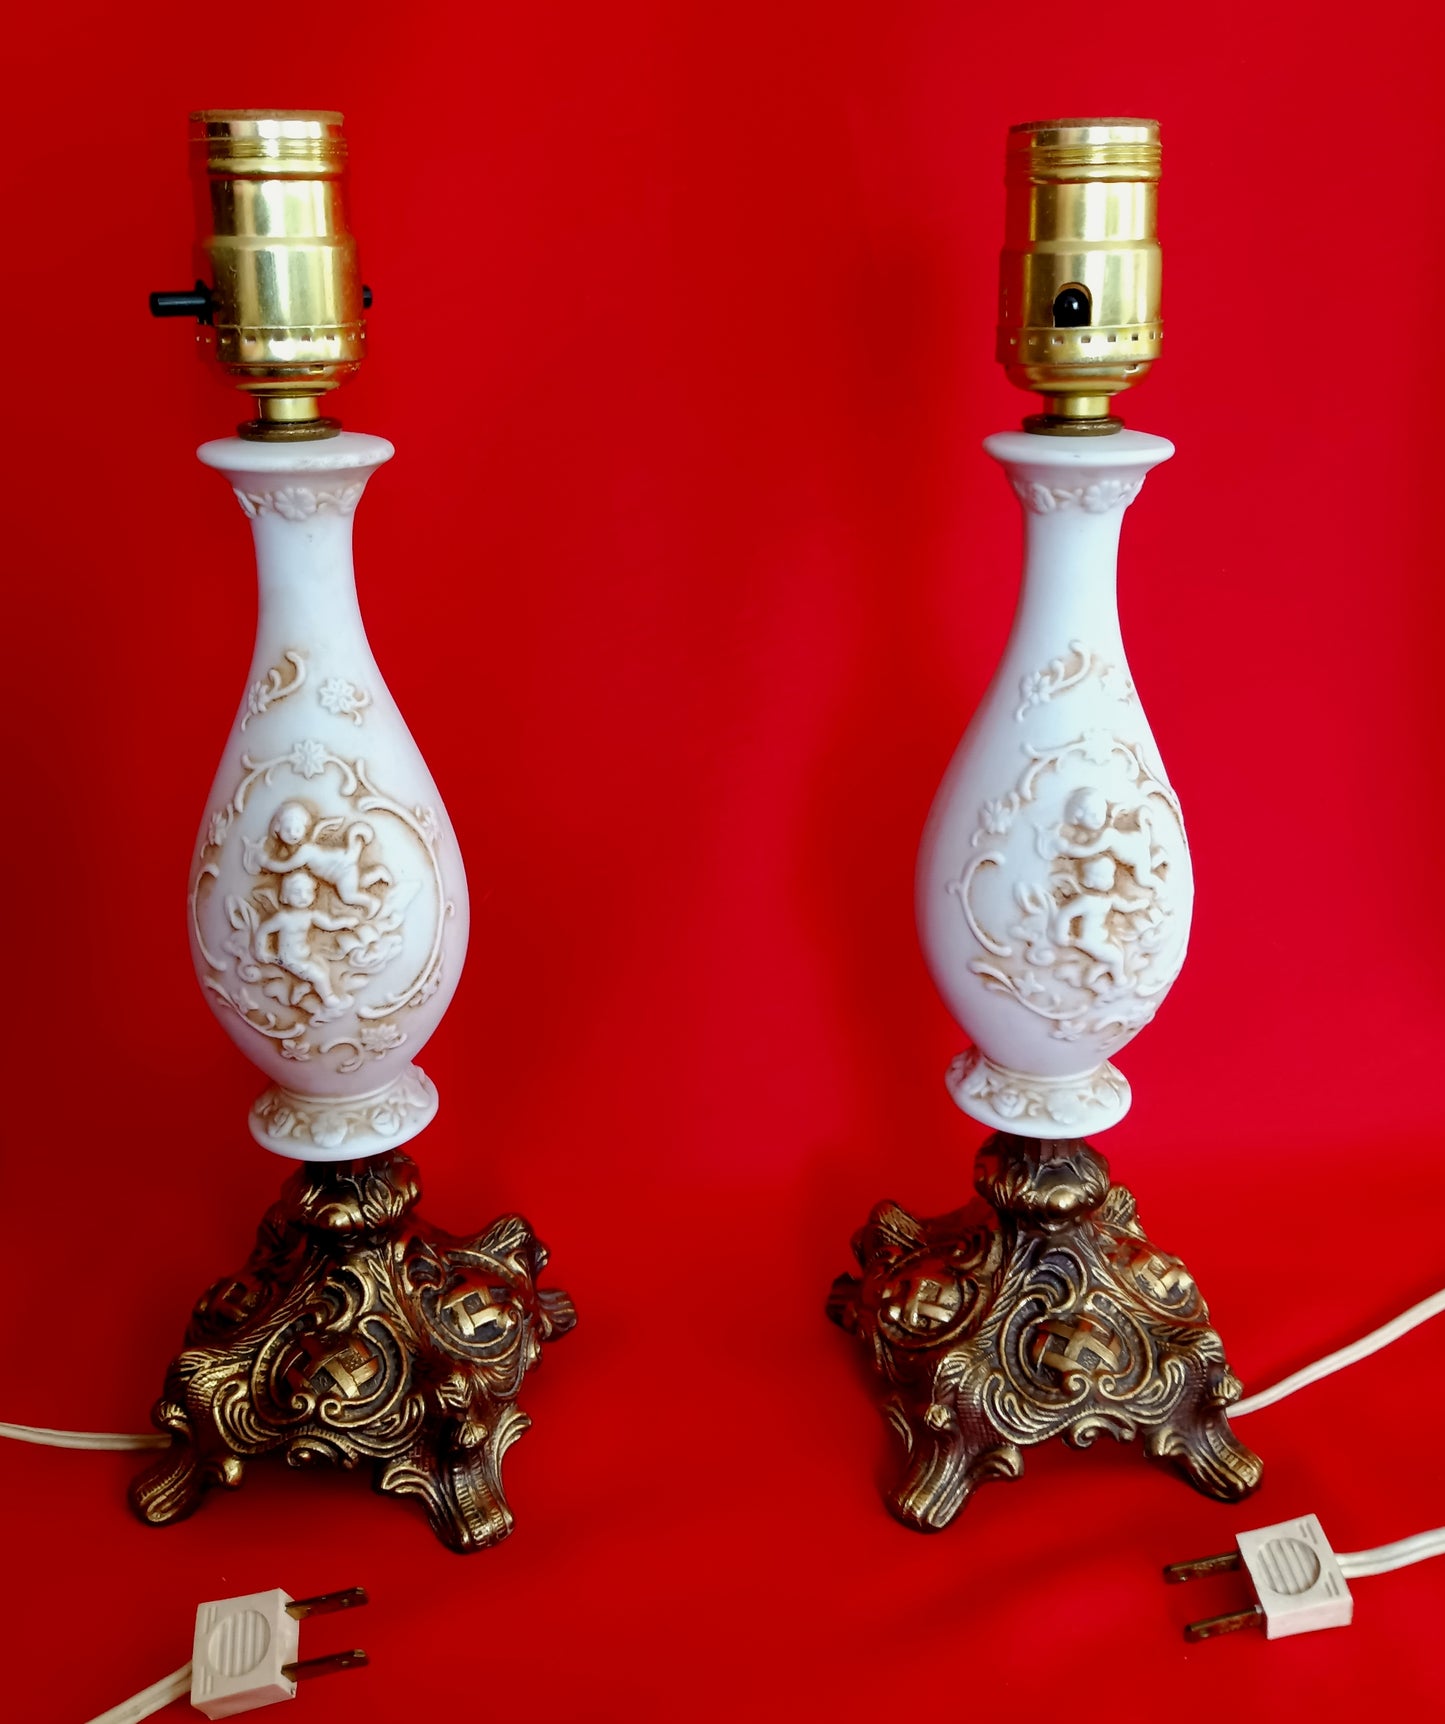 Pair Bisque Porcelain Mid Century Accent Table Lamps Off White w/ Embossed Cherubs/Angels Gold Cast Brass Footed Base Rococo Style Retro